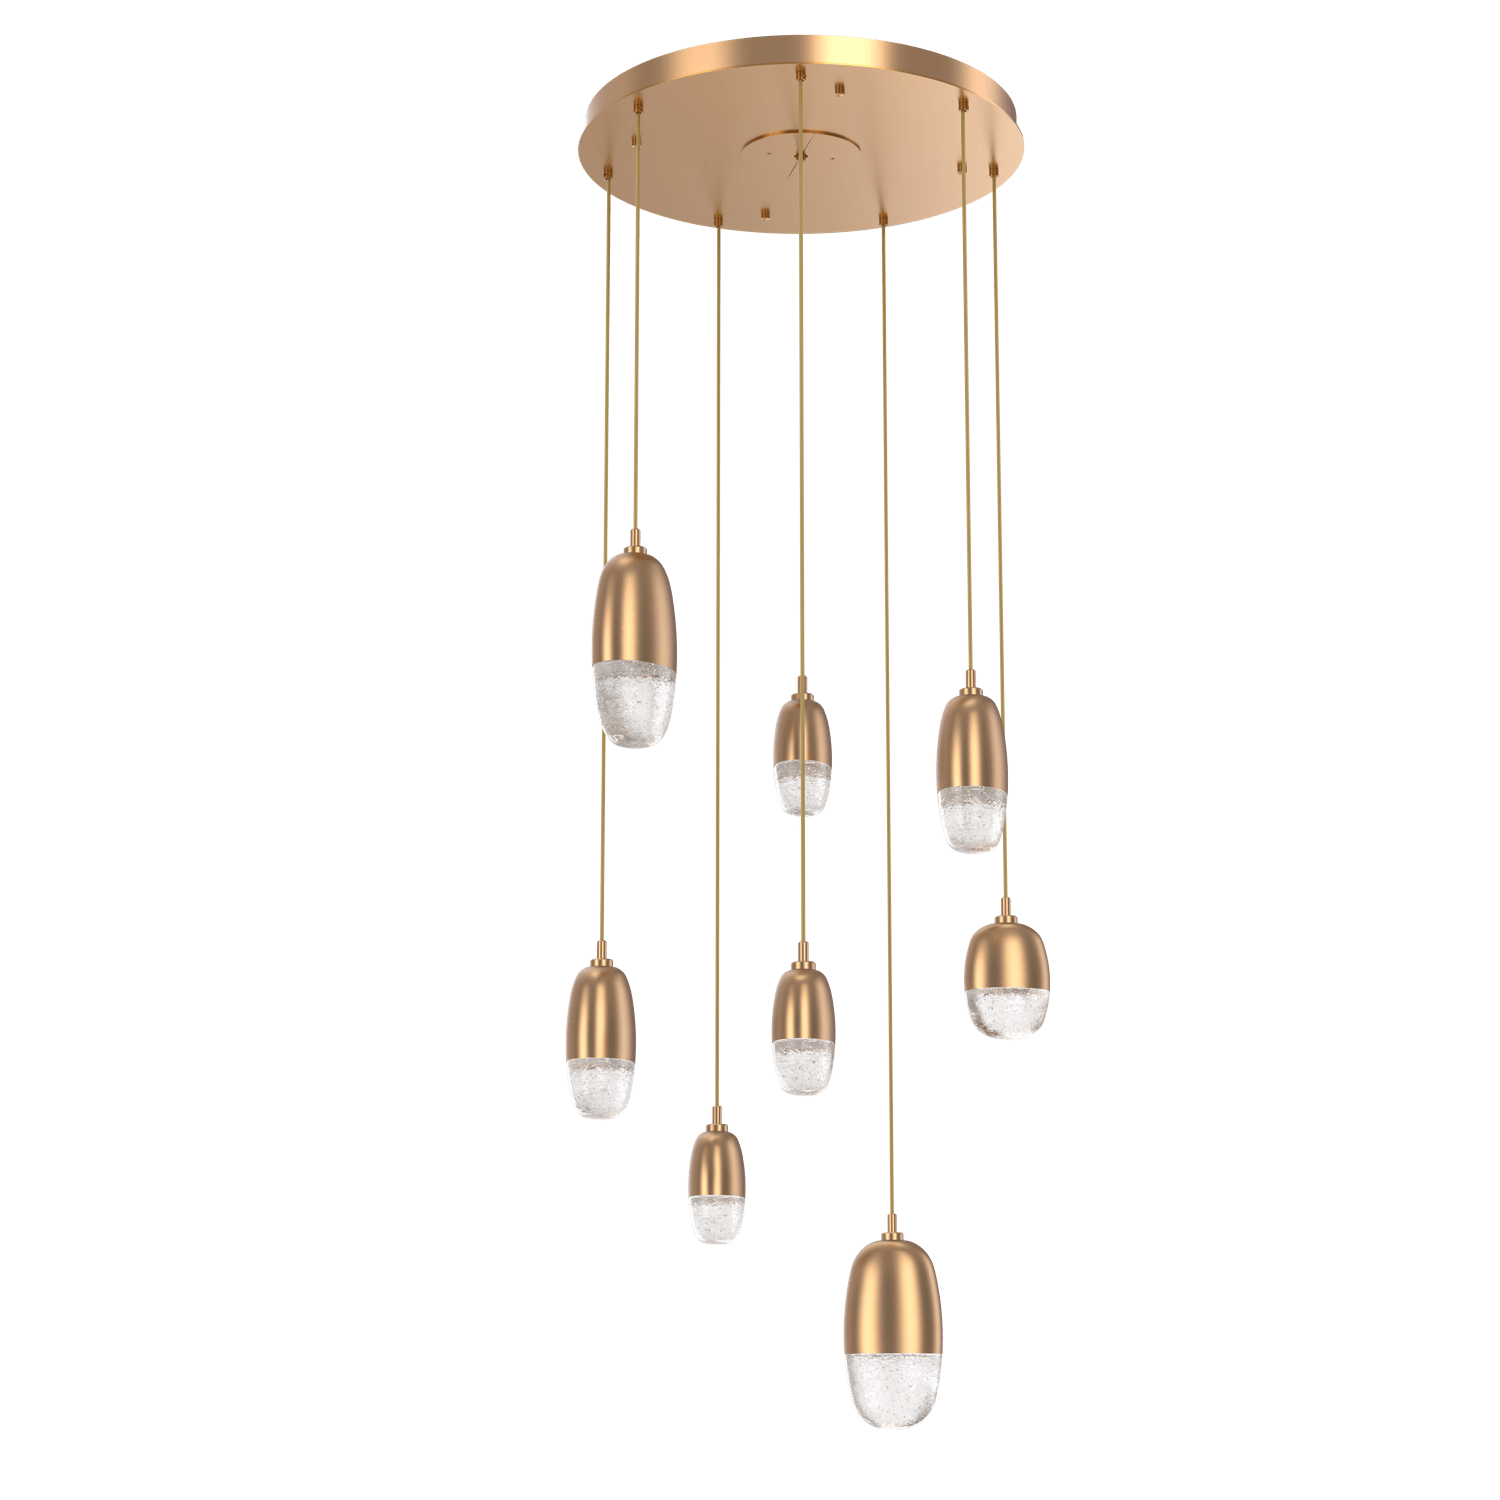 CHB0079-08-NB-Hammerton-Studio-Pebble-8-light-round-pendant-chandelier-with-novel-brass-finish-and-clear-cast-glass-shades-and-LED-lamping